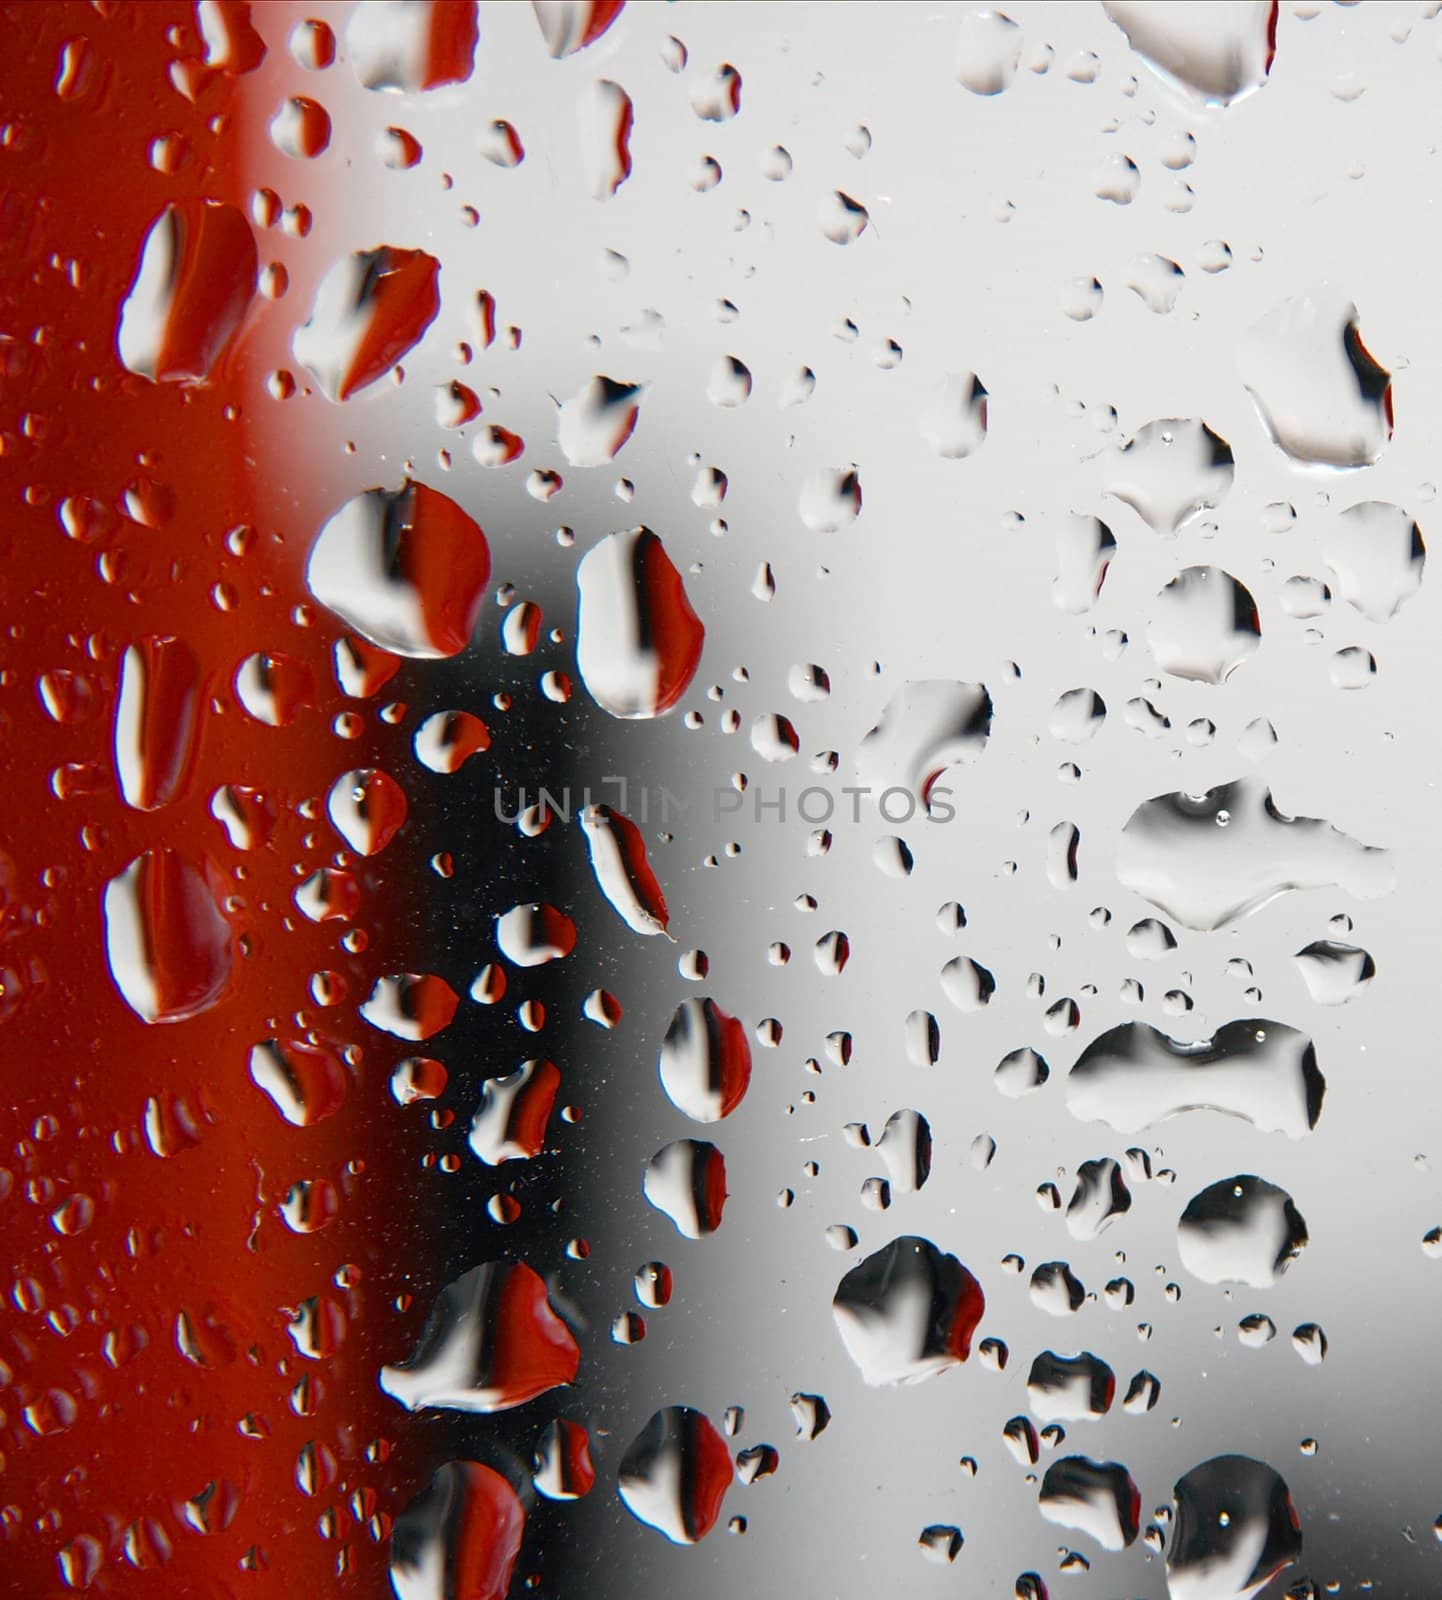 Raindrops on a glass surface, red, black, white background